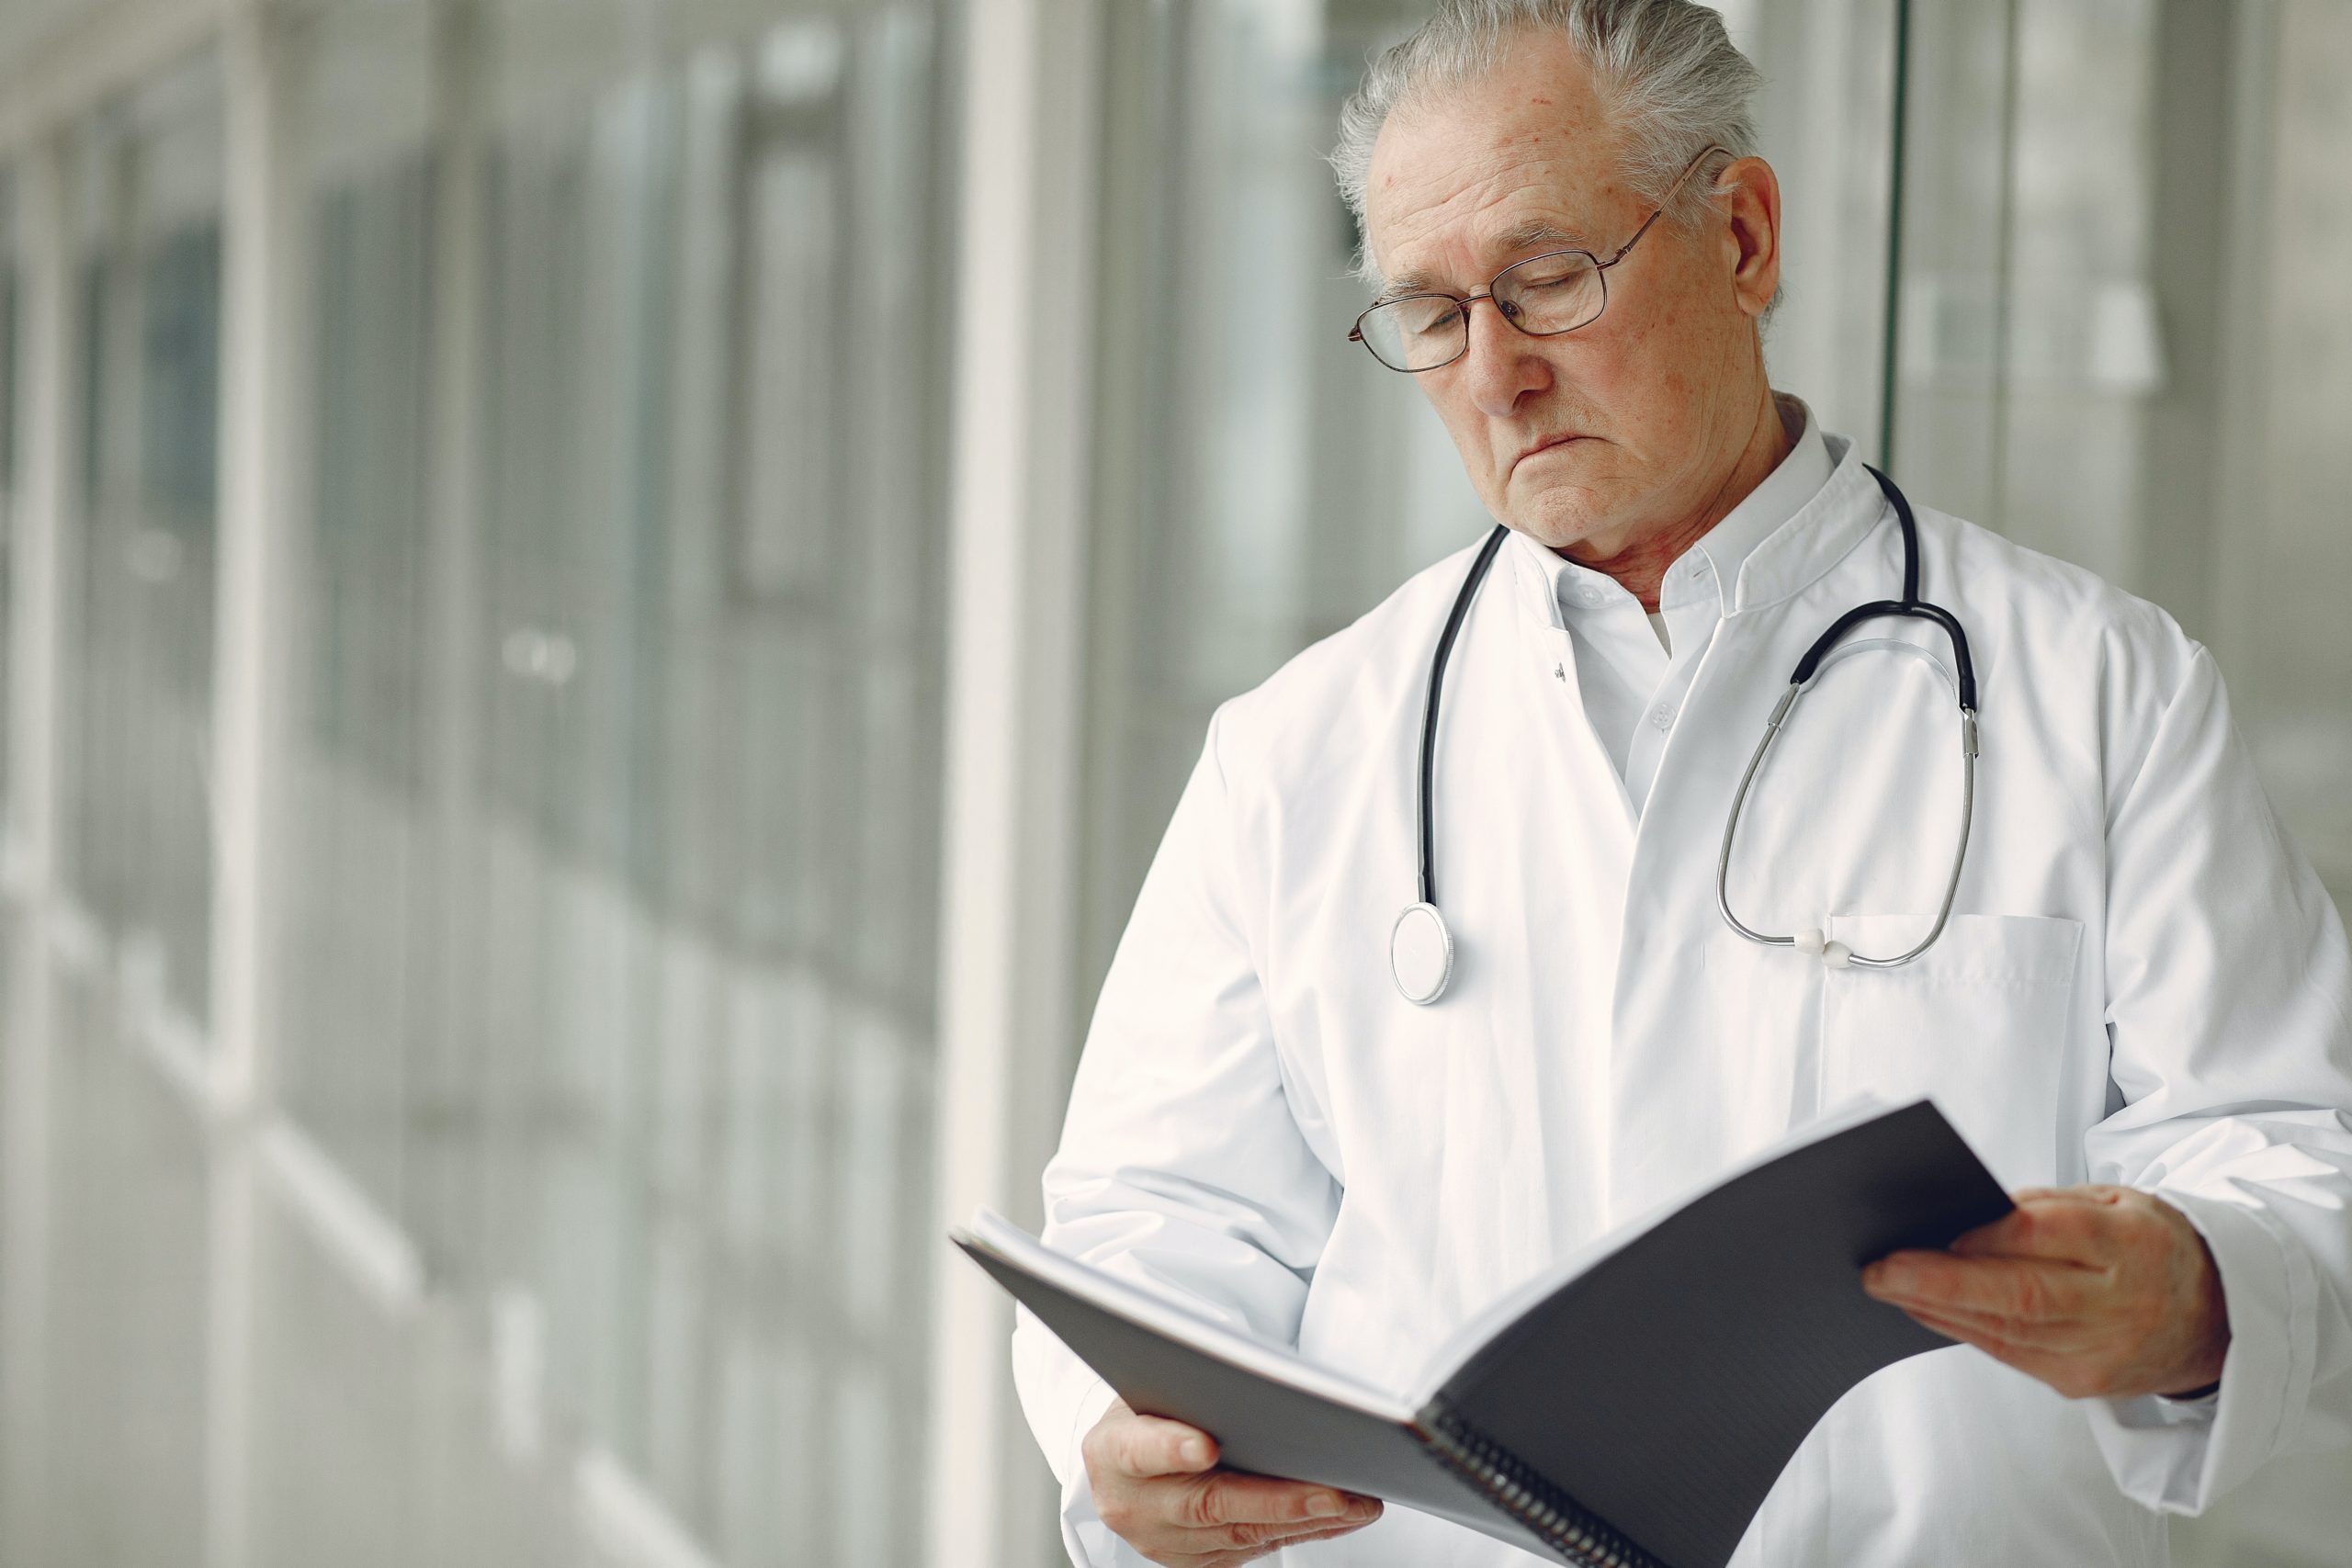 A middle-aged to elderly male doctor is holding an open book and looking down on it.